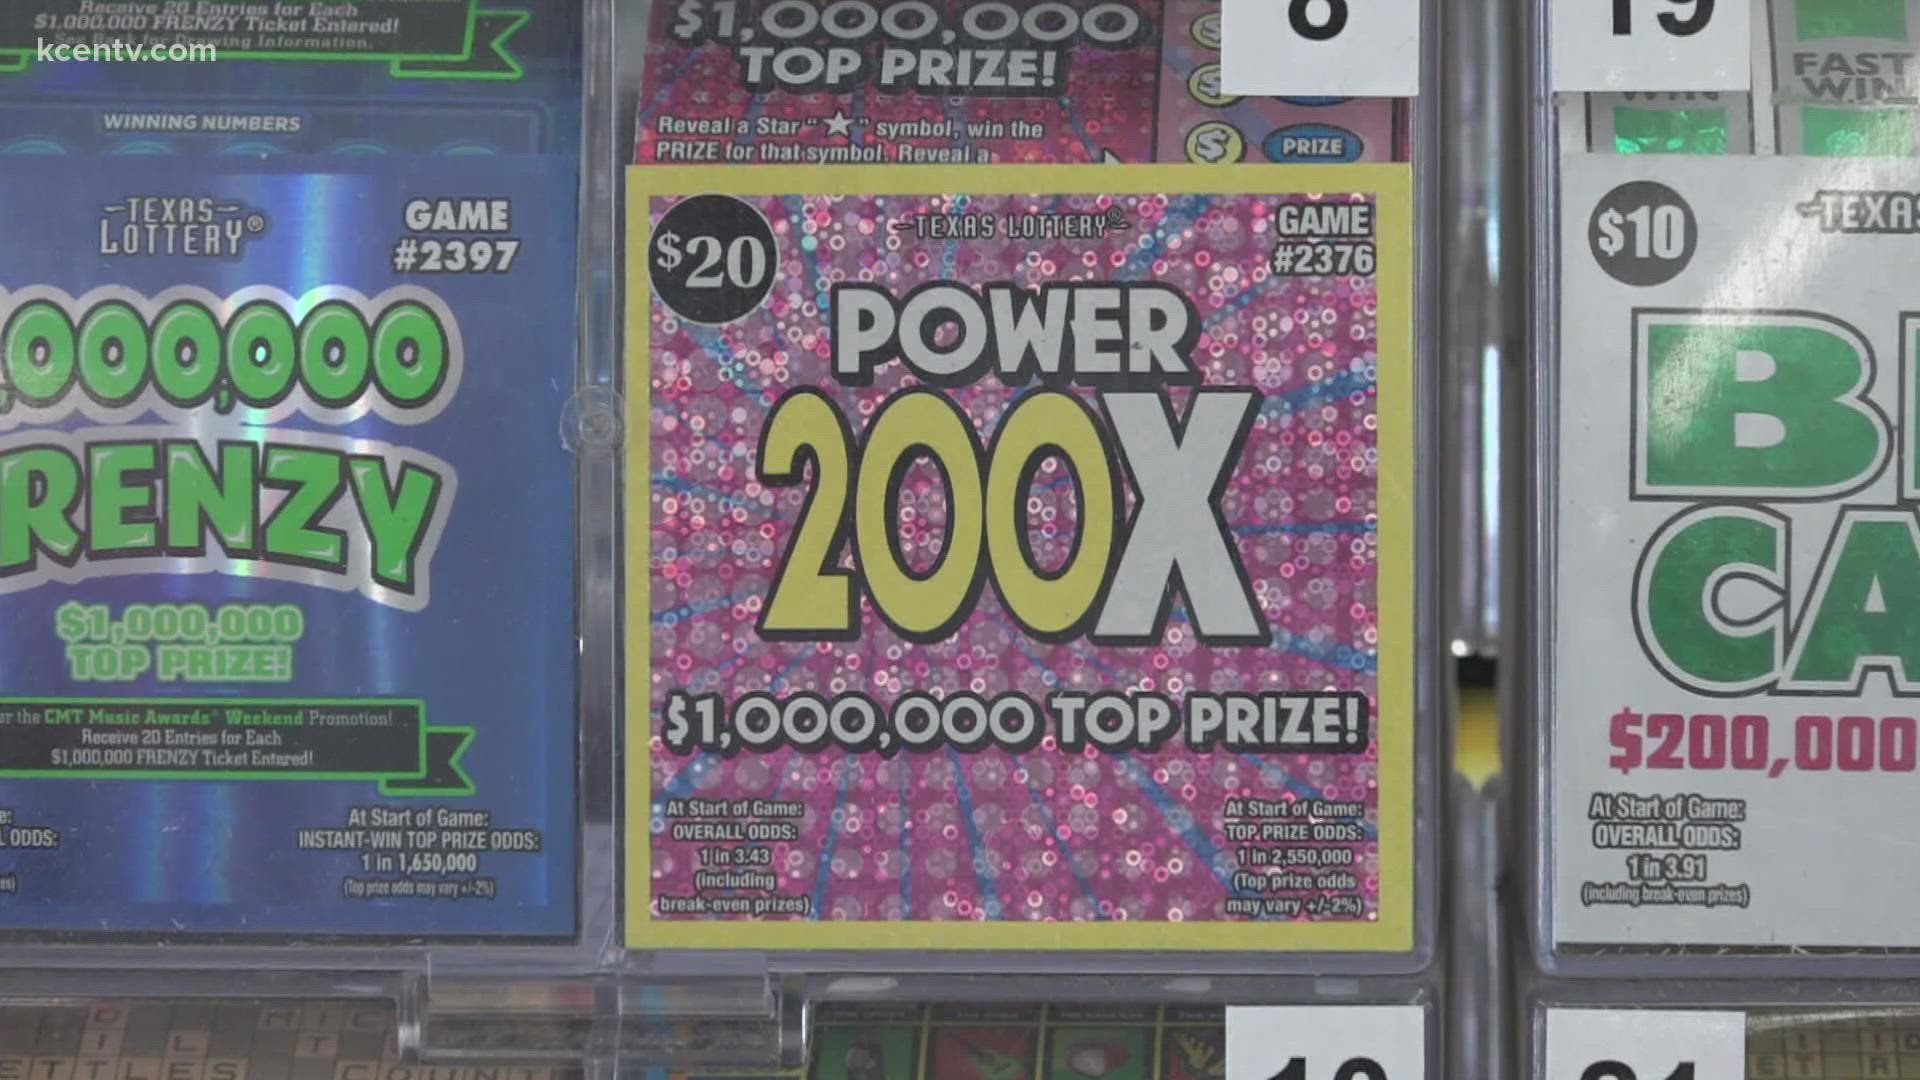 The Texas Lottery Commission said a Salado resident won $1 million with a Power 200X ticket.